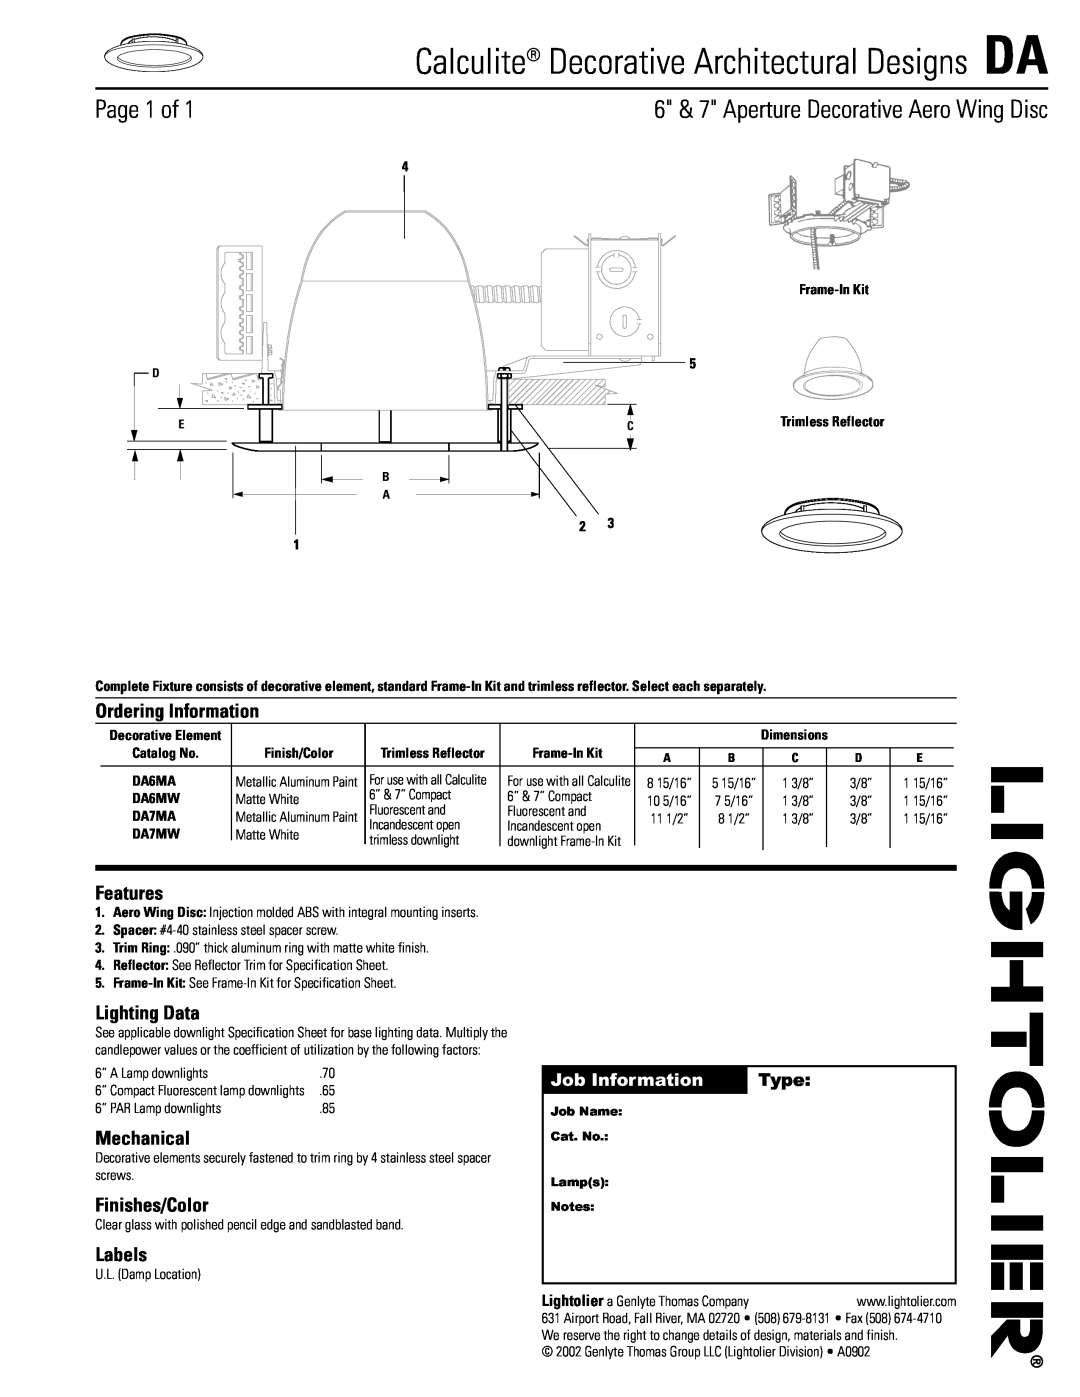 Lightolier dimensions Calculite Decorative Architectural Designs DA, Page 1 of, Ordering Information, Features, Labels 